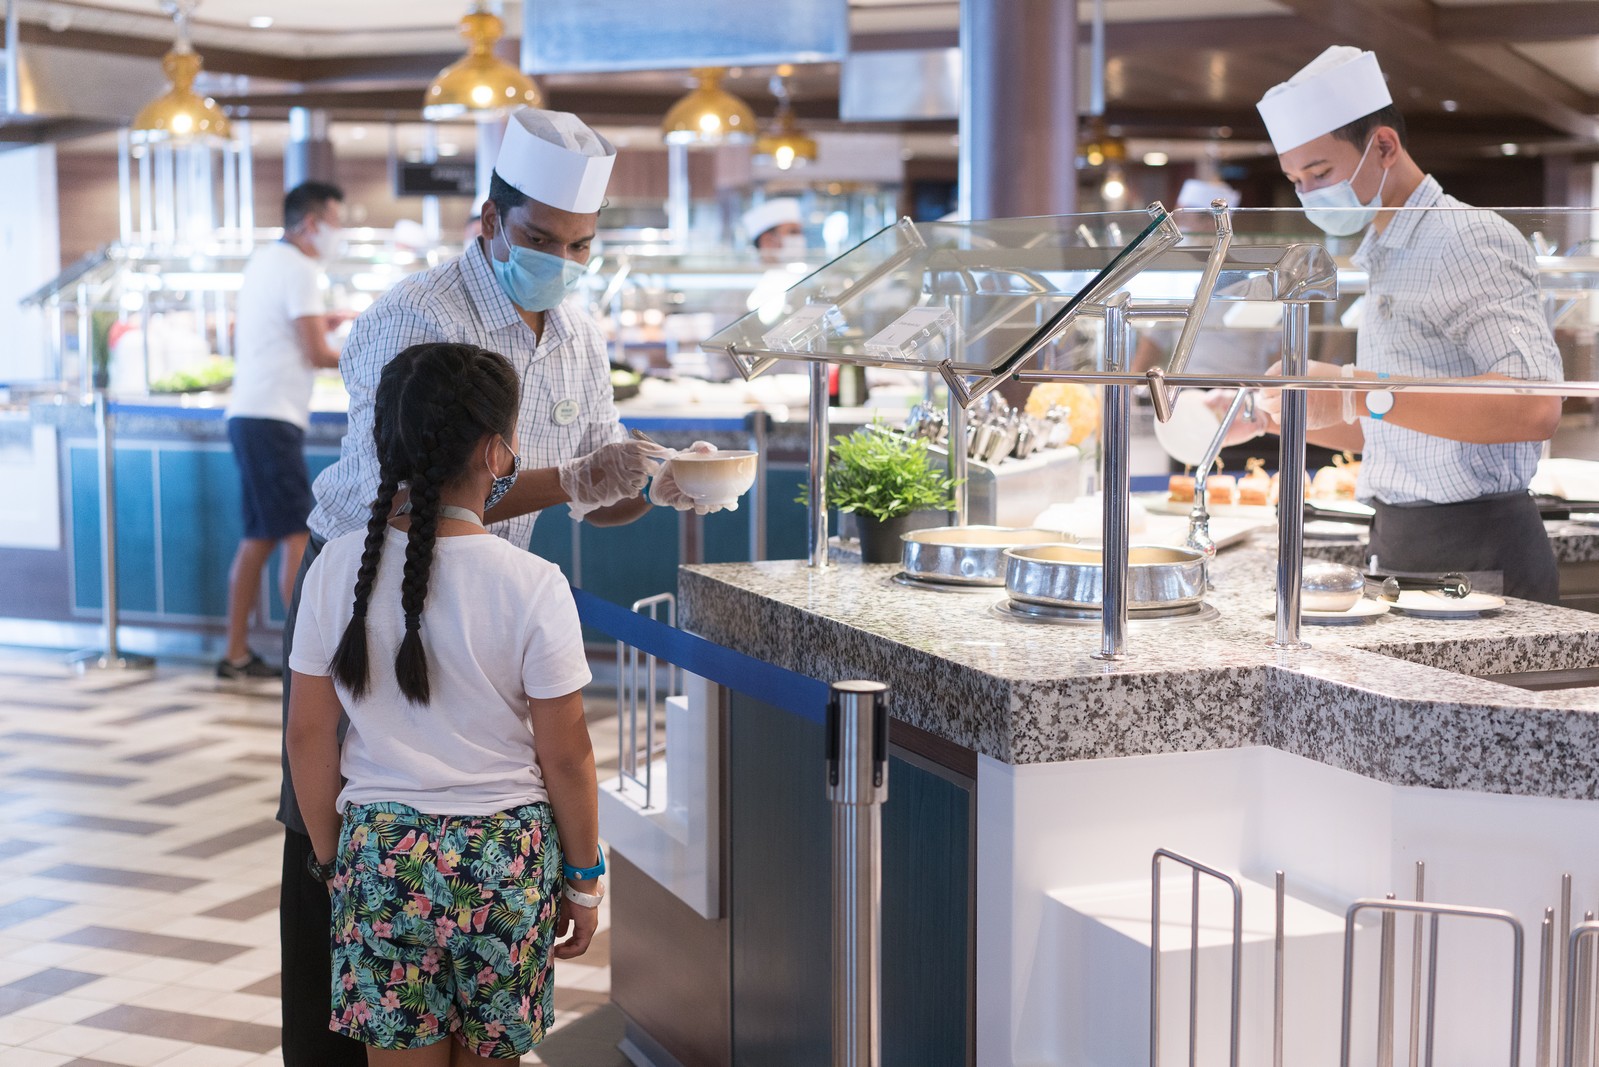 At Windjammer Marketplace, previously a self-service experience, dedicated crew now serve guests and offer a greater variety of grab-and-go items.